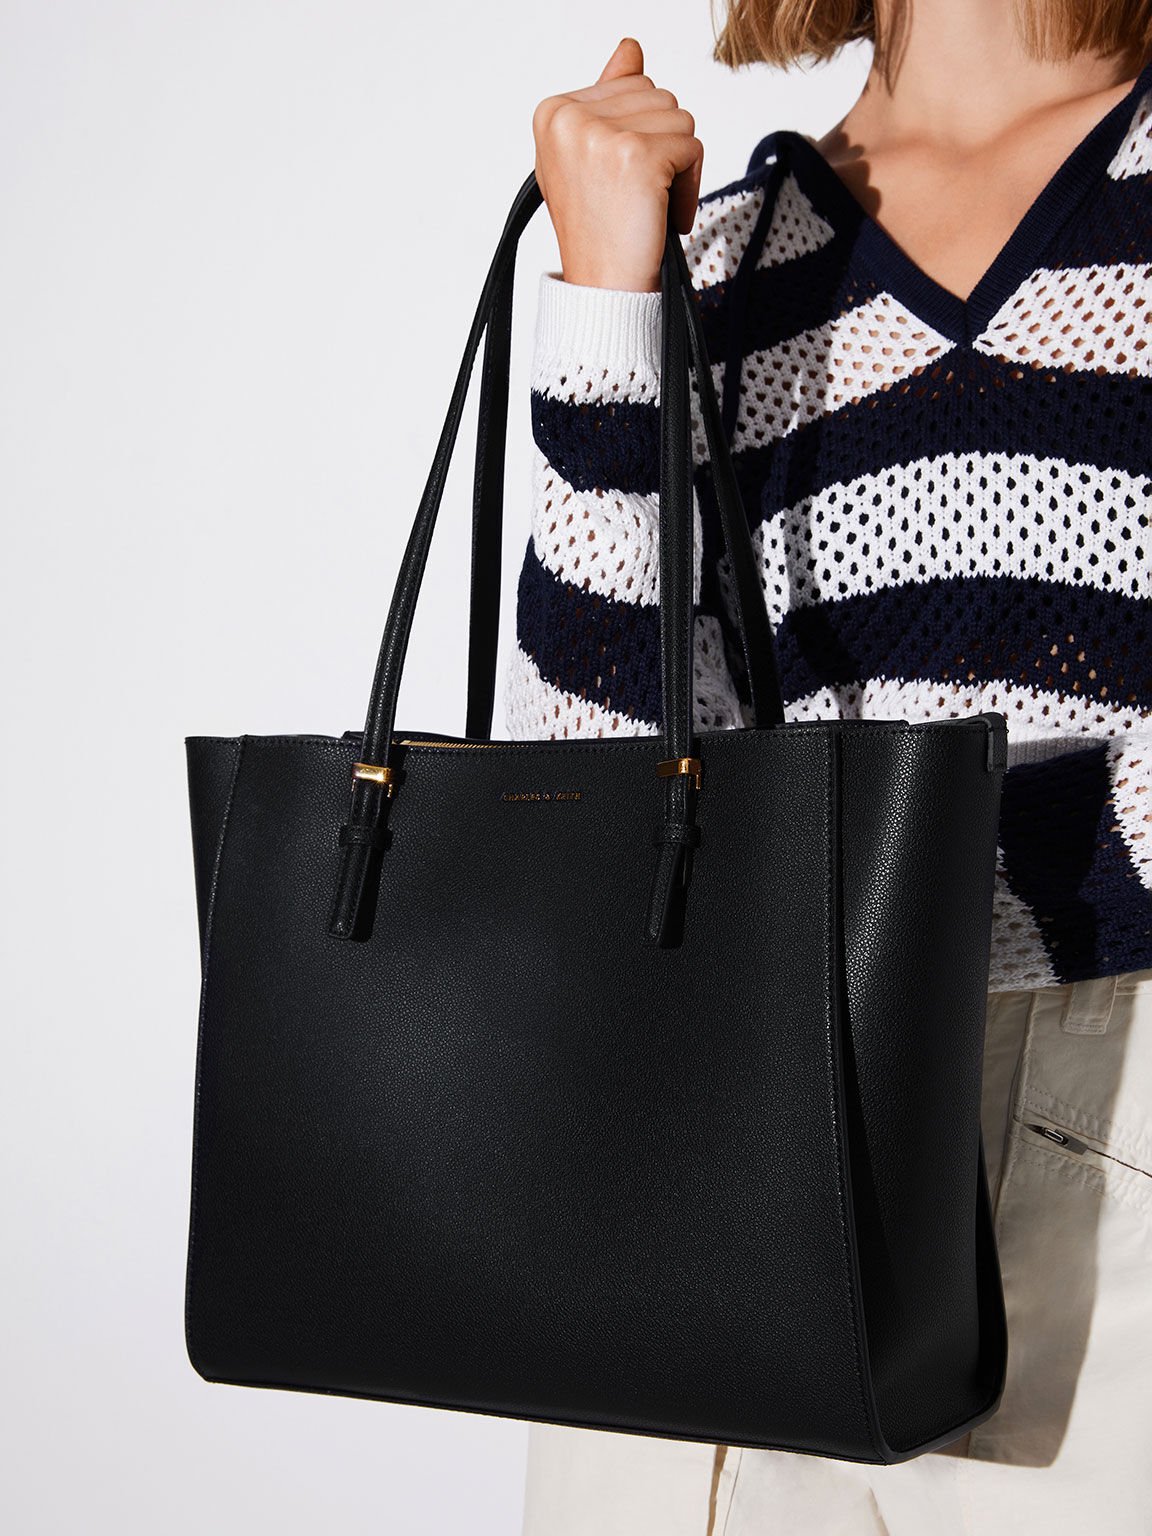 Top 40 best designer purse brands for women 2022 | Classy and affordable -  Briefly.co.za